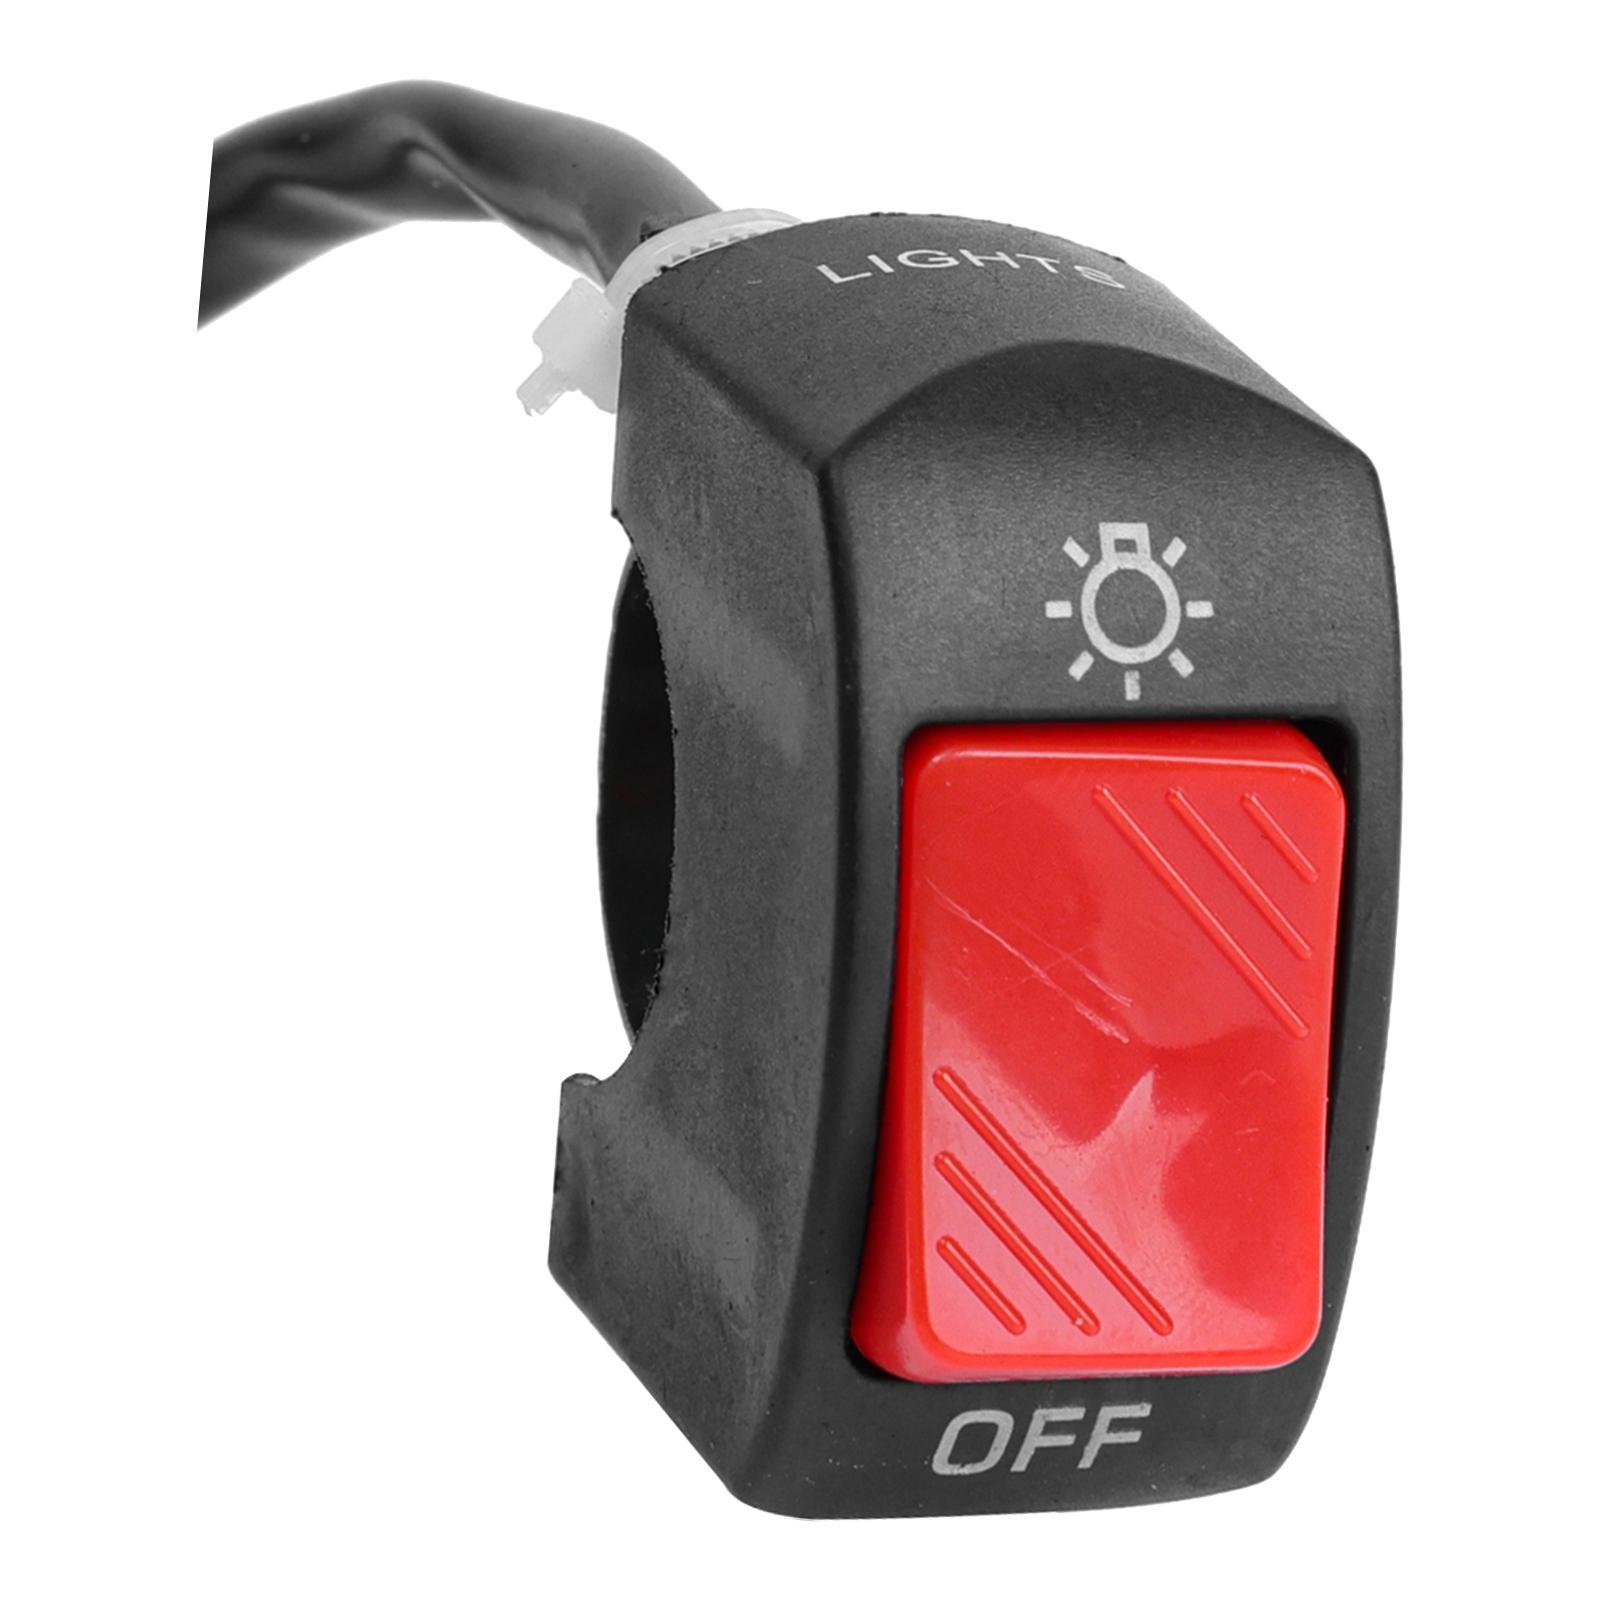 Motorcycle Headlight Control Switch Button Easy Installation Replaces on Off Switch